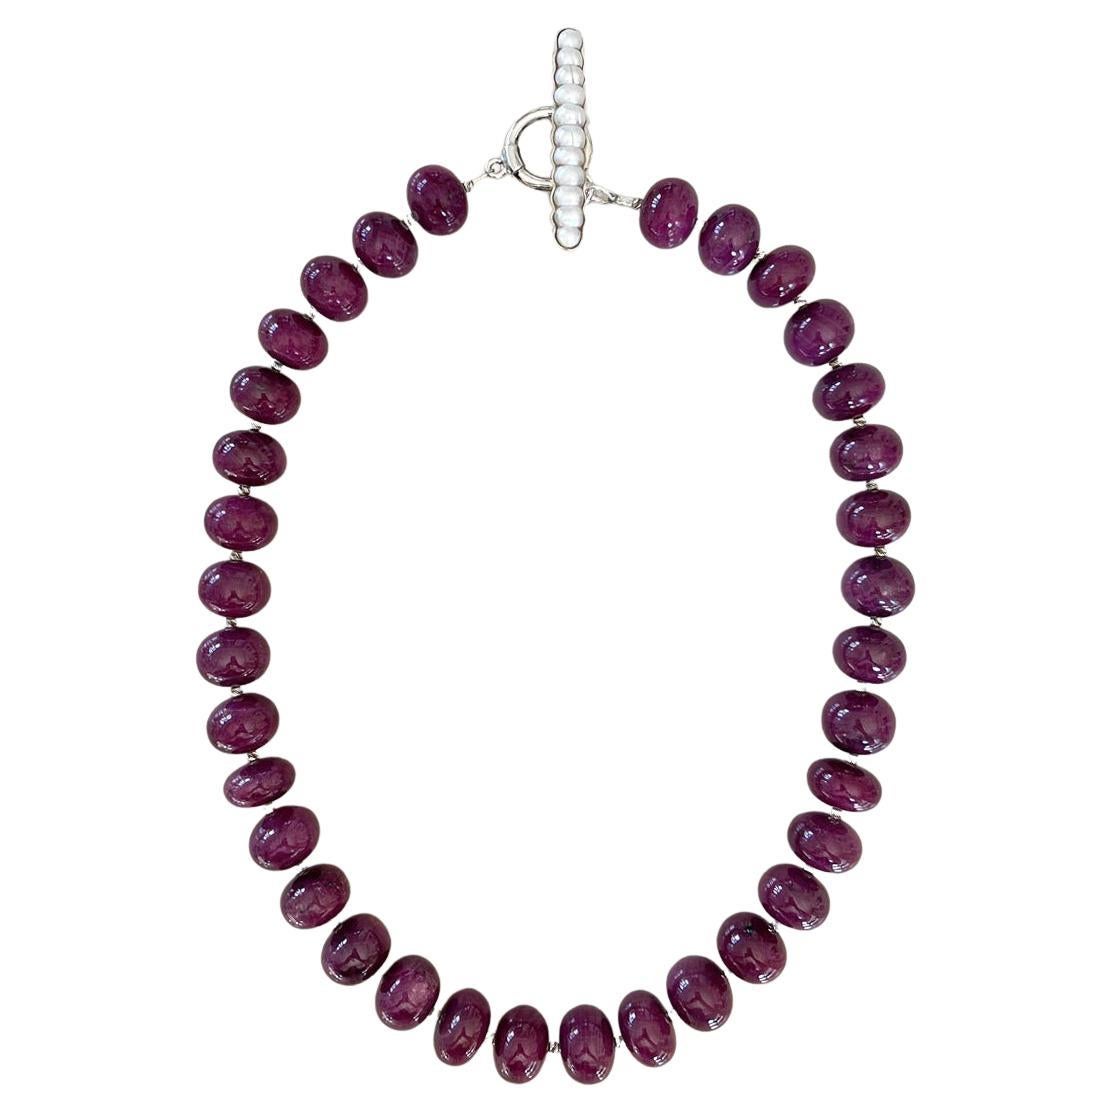 49.5cm Womens Natural Red Ruby Gemstone Beads Necklace with Silver Clasp 19.5 inches 